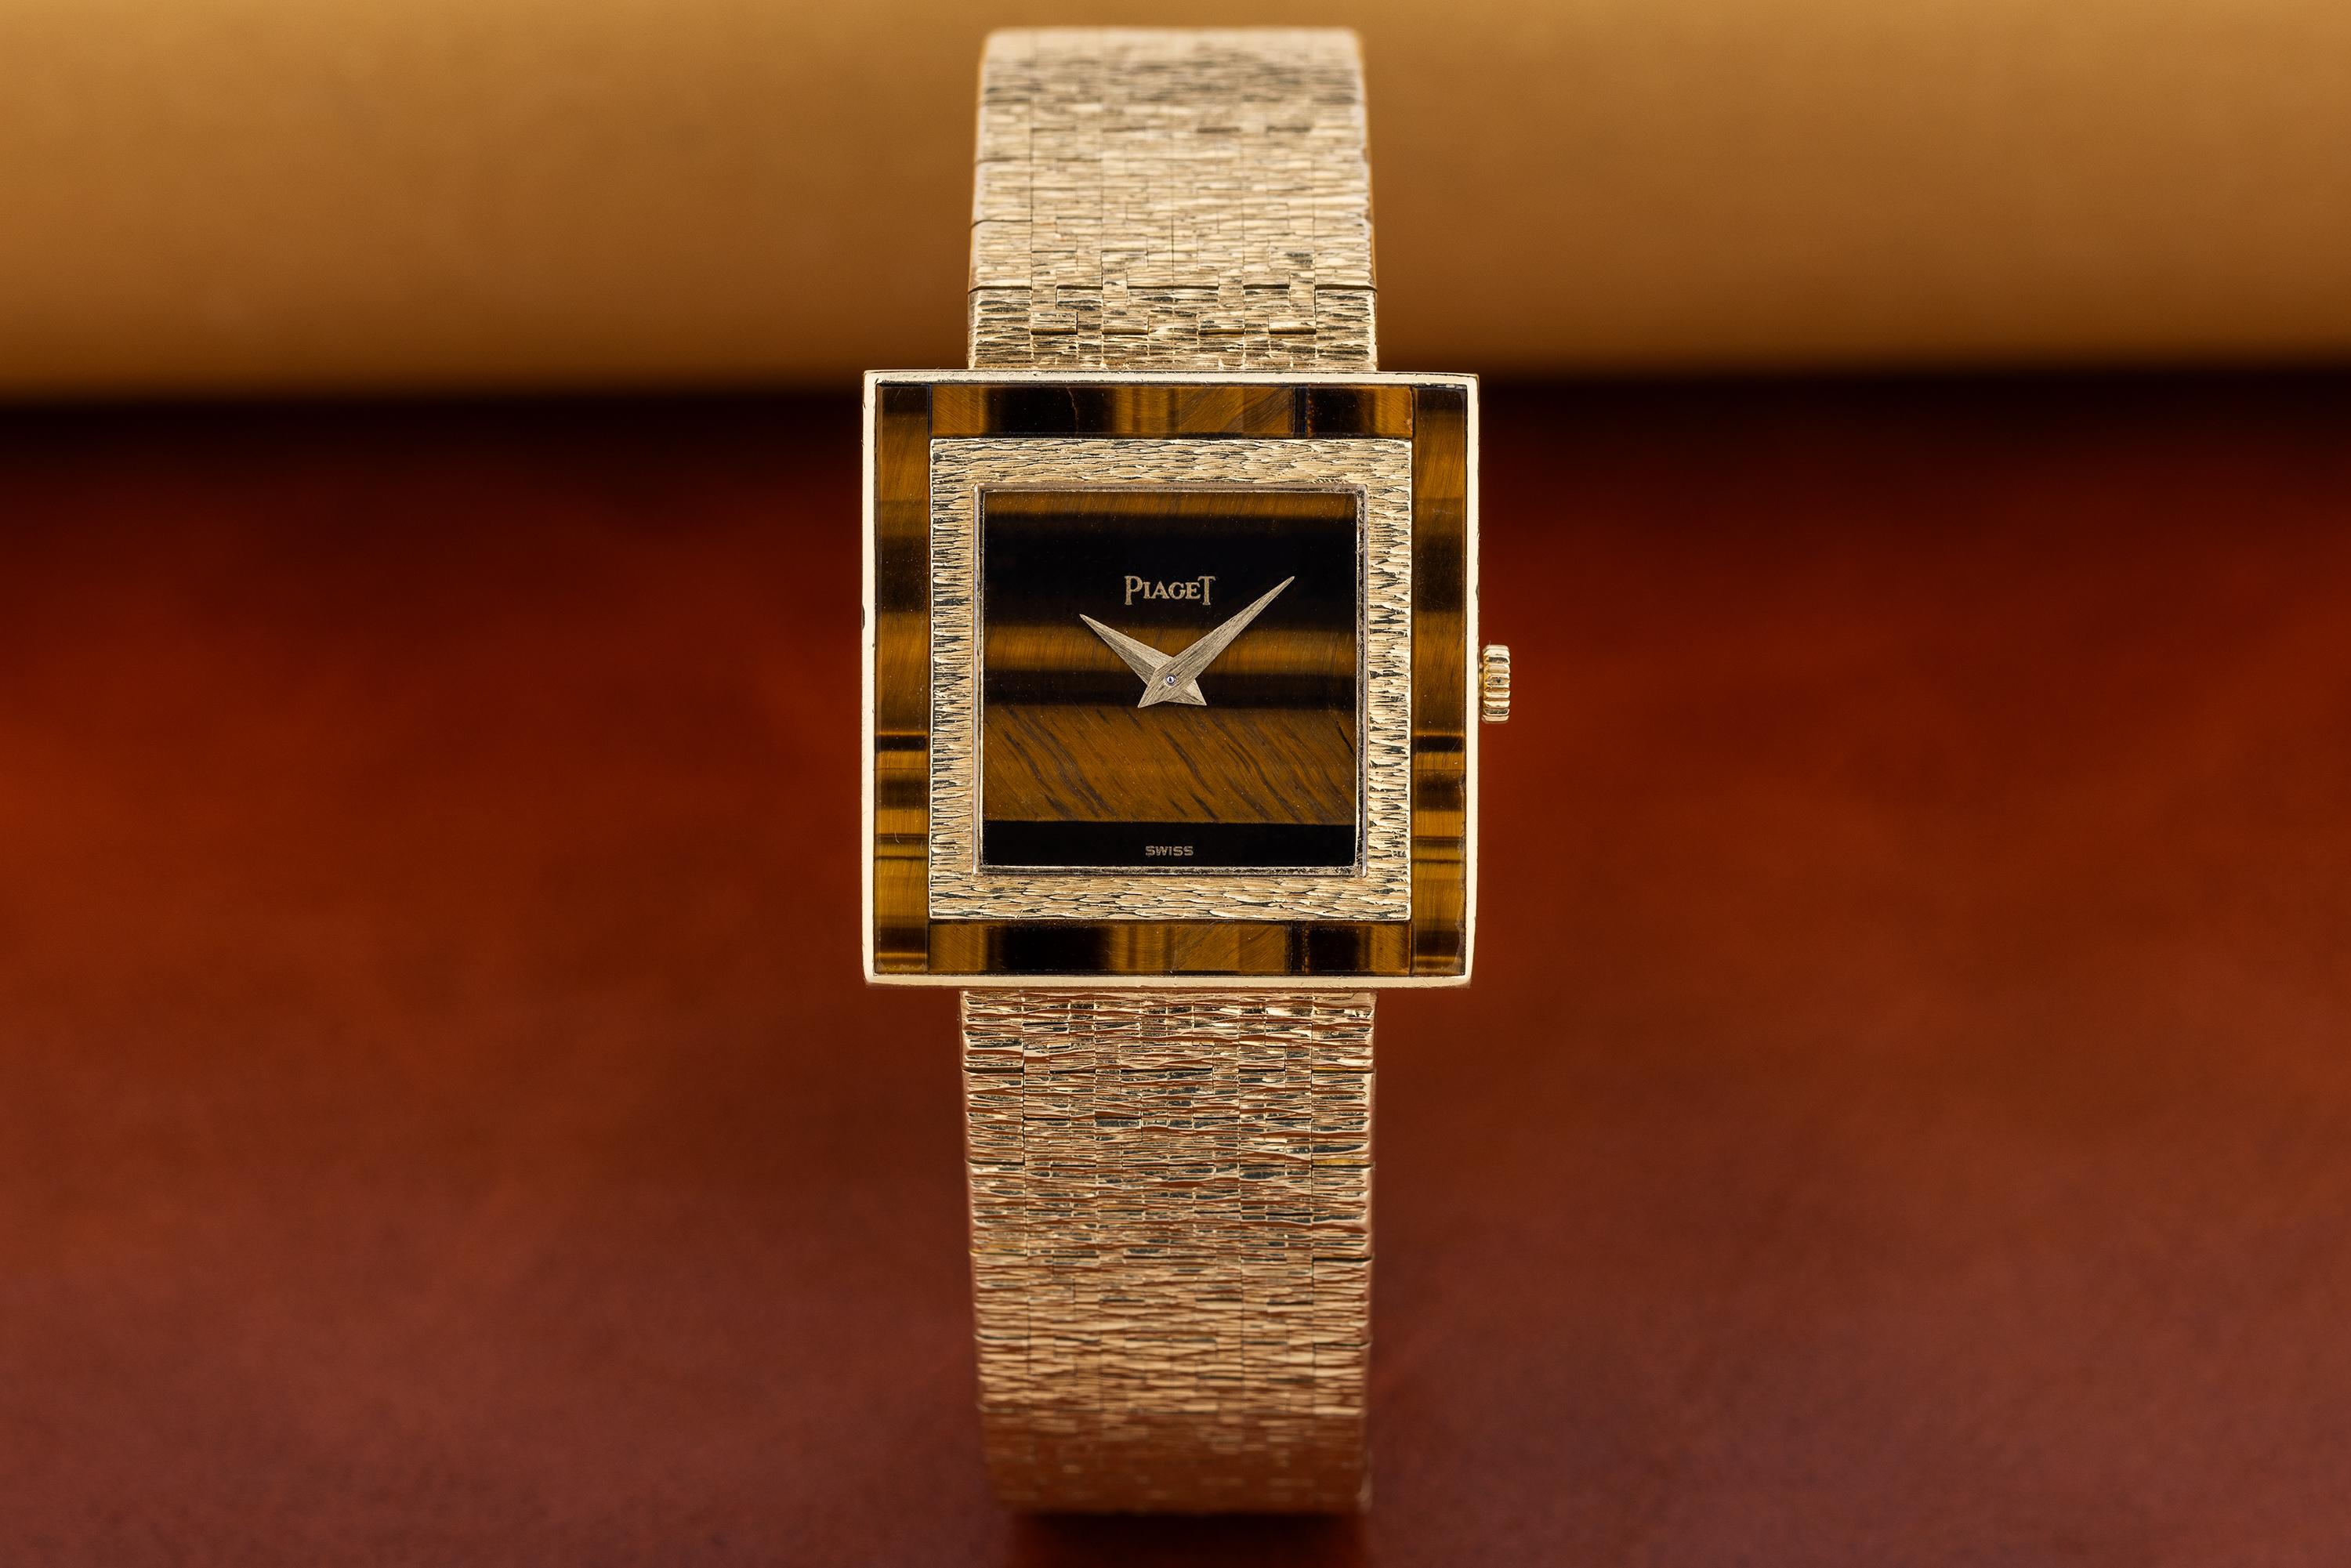 Vintage Piaget  Tiger Eye Dial And Bezel  18k Yellow Gold  Circa 1970's  25mm

Pre-owned, excellent condition vintage Piaget 18k Yellow Gold ladies wristwatch circa 1970's. An incredible Tiger Eye dial and bezel, an 18k Yellow Gold 25mm case,